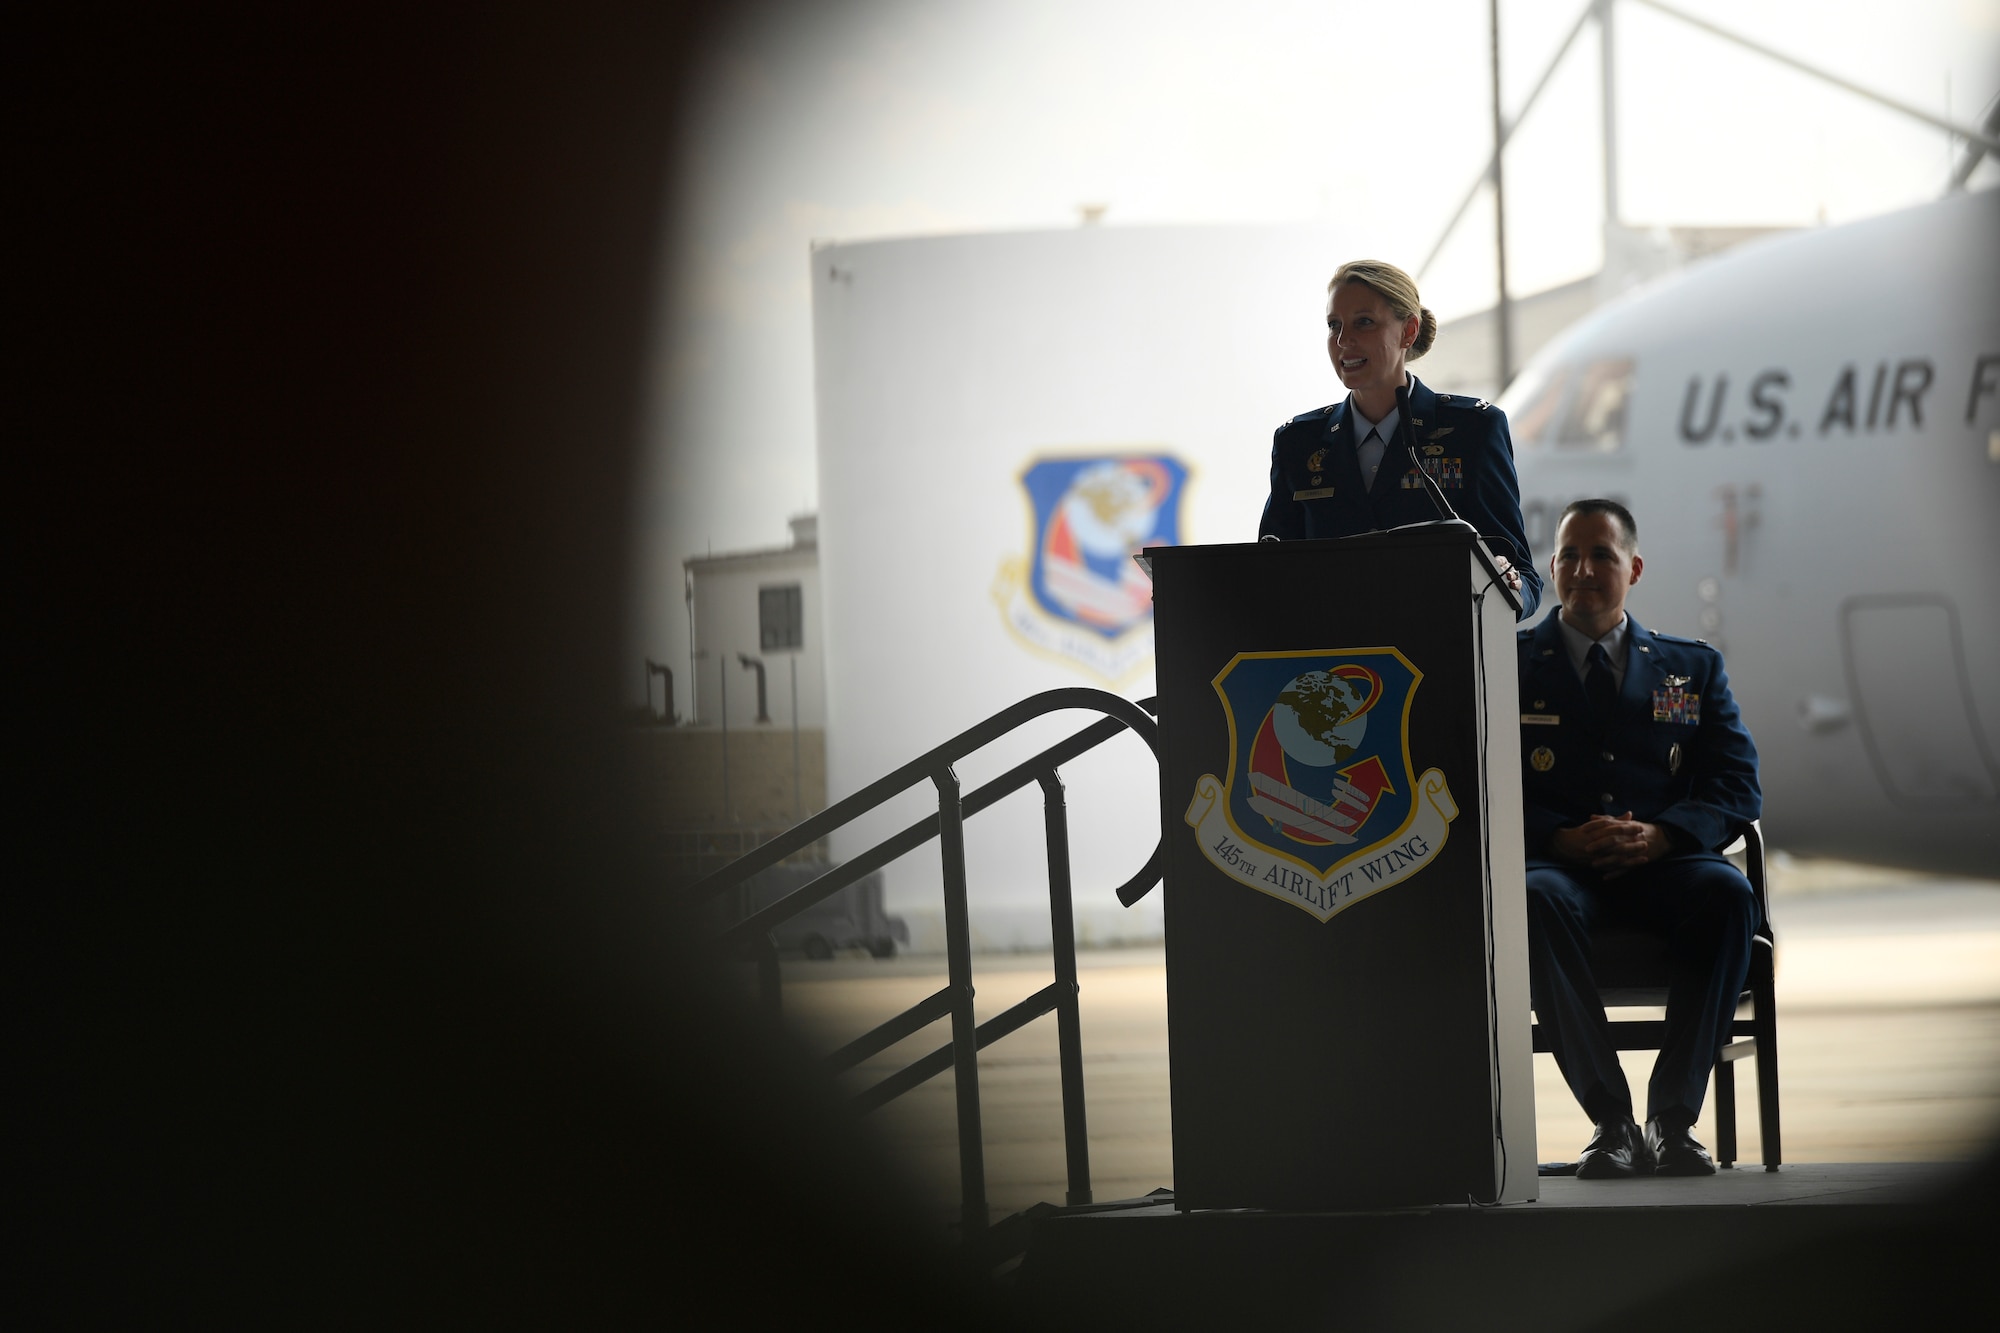 U.S. Air Force Col. Bryony Terrell, Commander of the 145th Airlift Wing (AW), addresses members of the unit during a Change of Command Ceremony held at the North Carolina Air National Guard (NCANG) Base, Charlotte Douglas International Airport, June 9, 2018. During the address, Terrell discussed her eagerness to start working with Airmen of the NCANG and to continue the units transition to the C-17 Globemaster III.